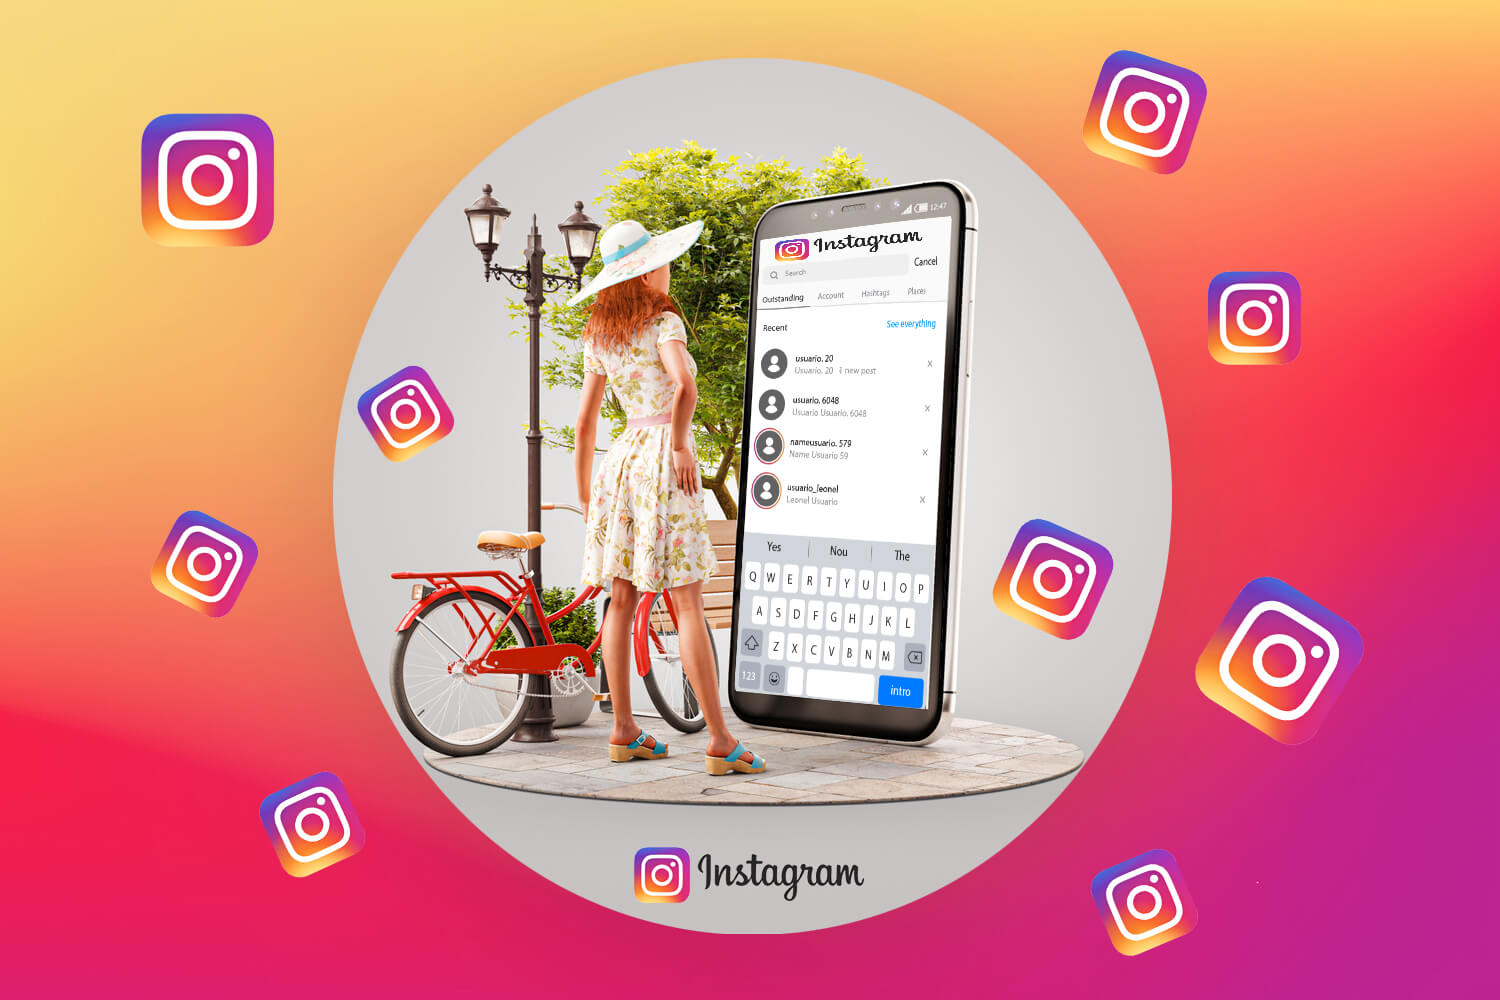 Instagram search and explore